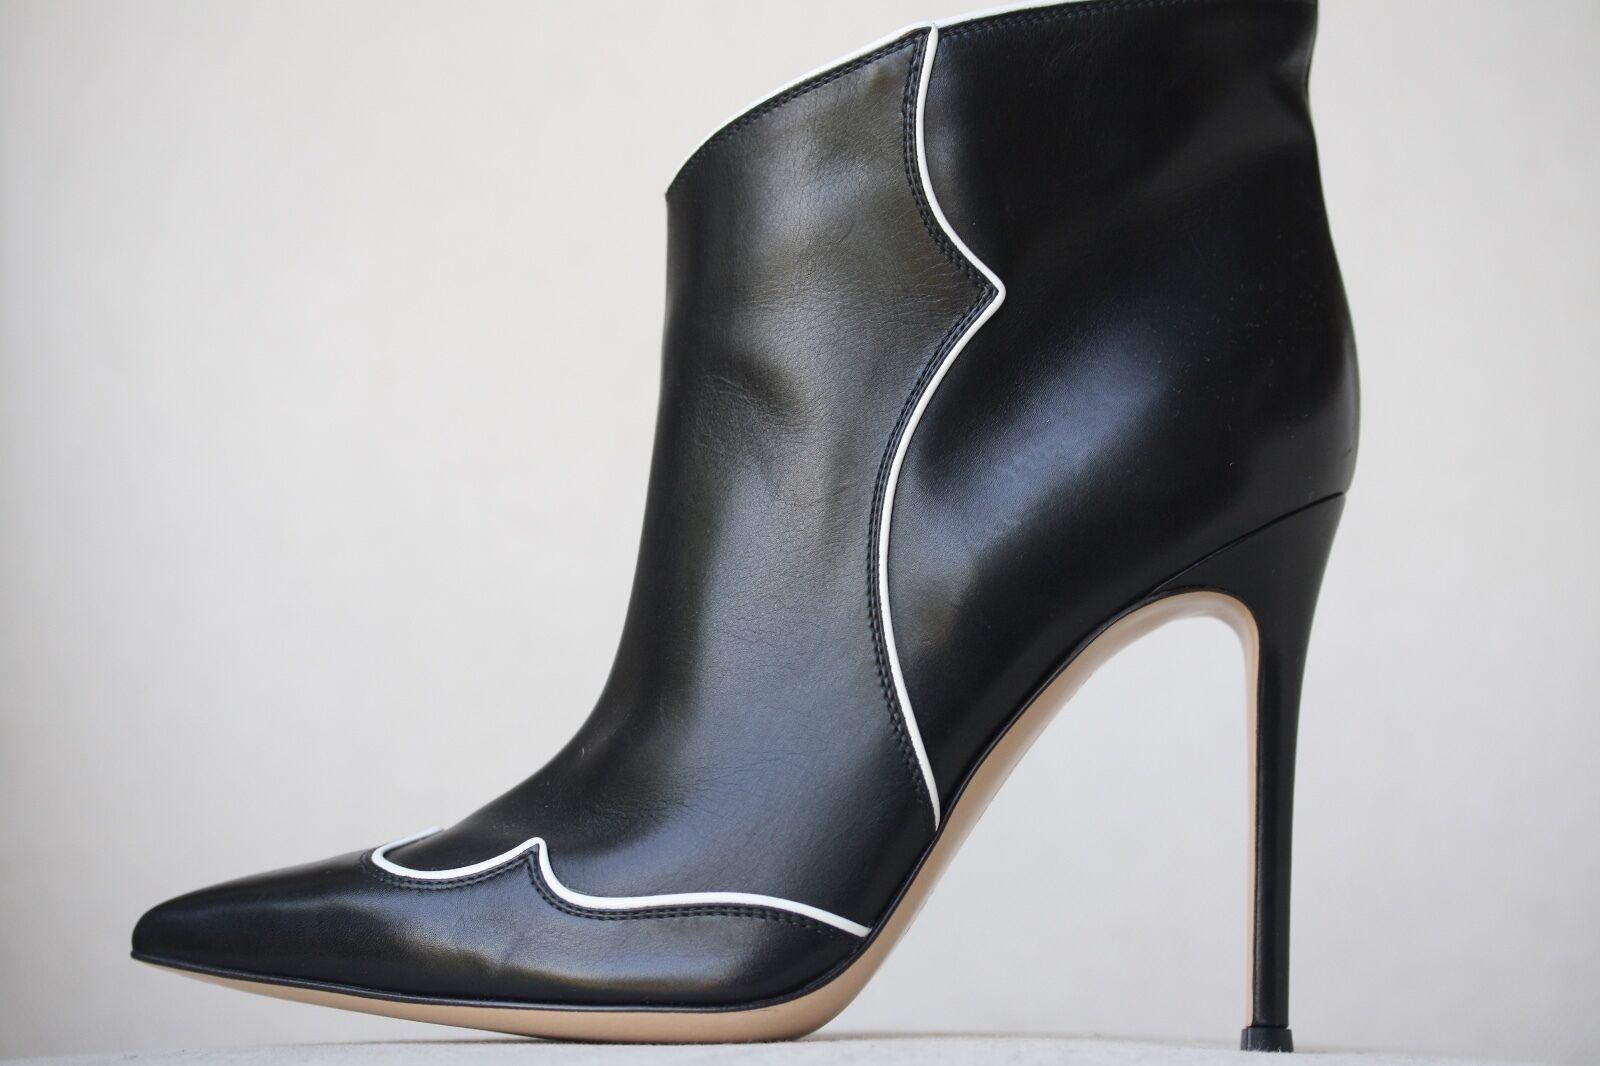 Piping gives Gianvito Rossi's boots a Western-inspired twist. This Italian-made pair is cut low at the front for a flattering effect. Heel measures approximately 105mm/ 4 inches. Black and white leather. Slip on. Fits true to size. Does not come